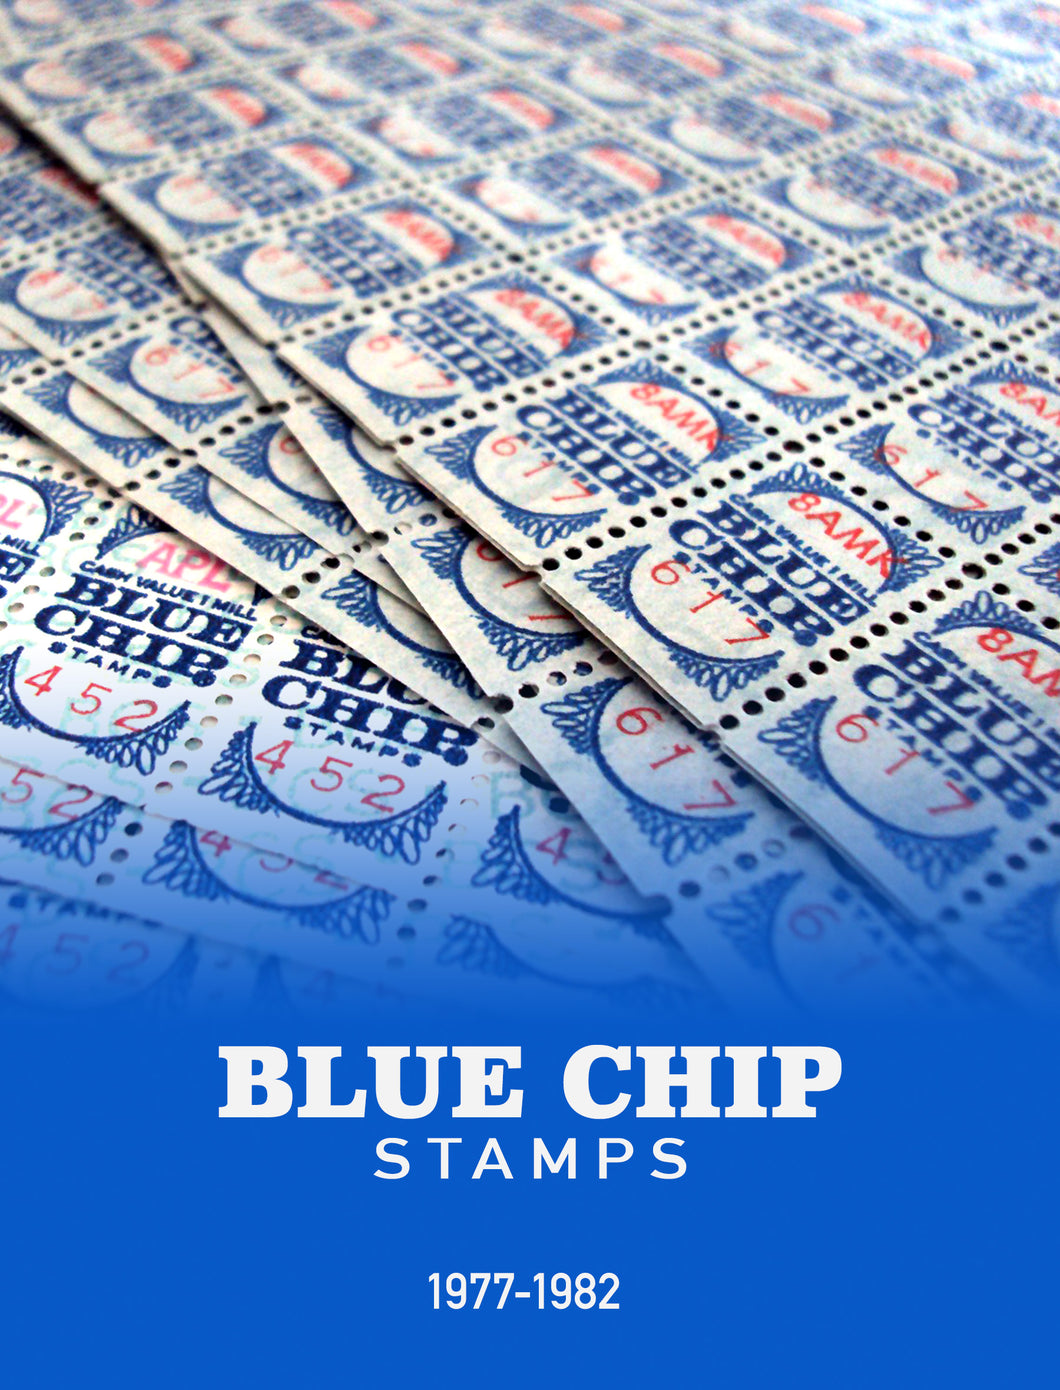 Blue Chip Stamps Letters to Shareholders